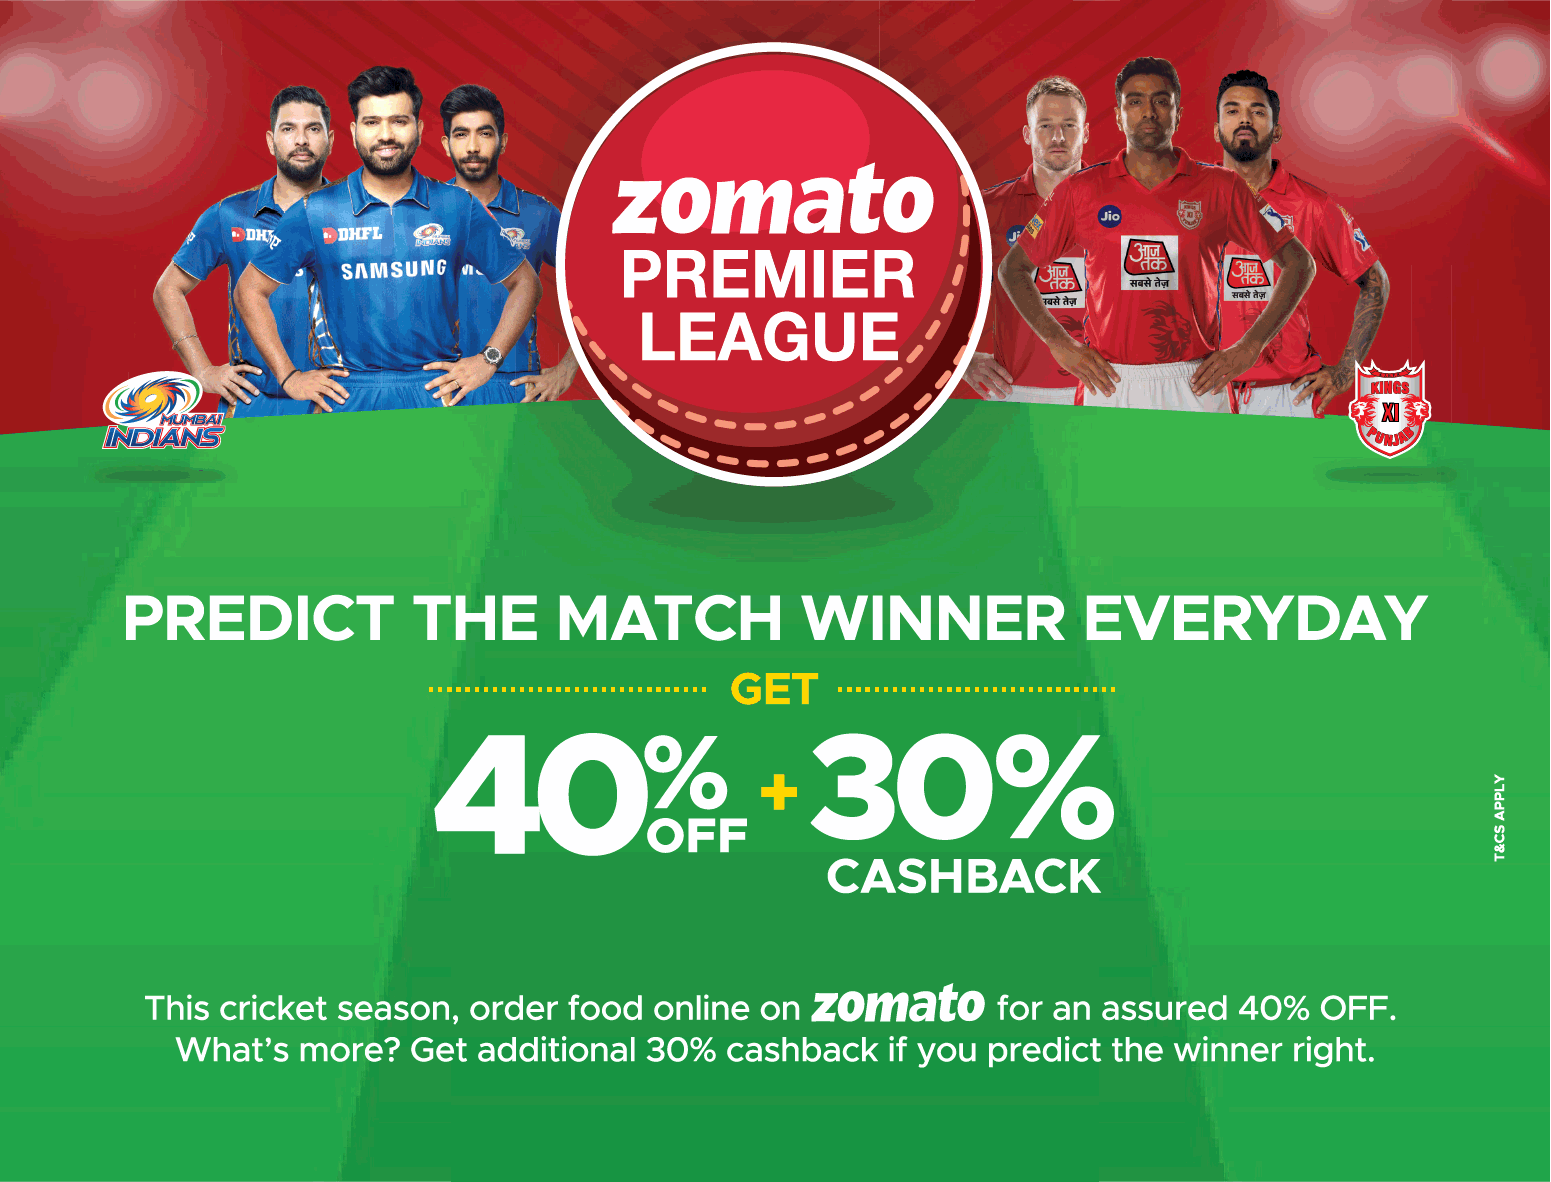 zomato-premiur-league-predict-the-match-winner-everyday-get-40%-off-ad-times-of-india-bangalore-10-04-2019.png